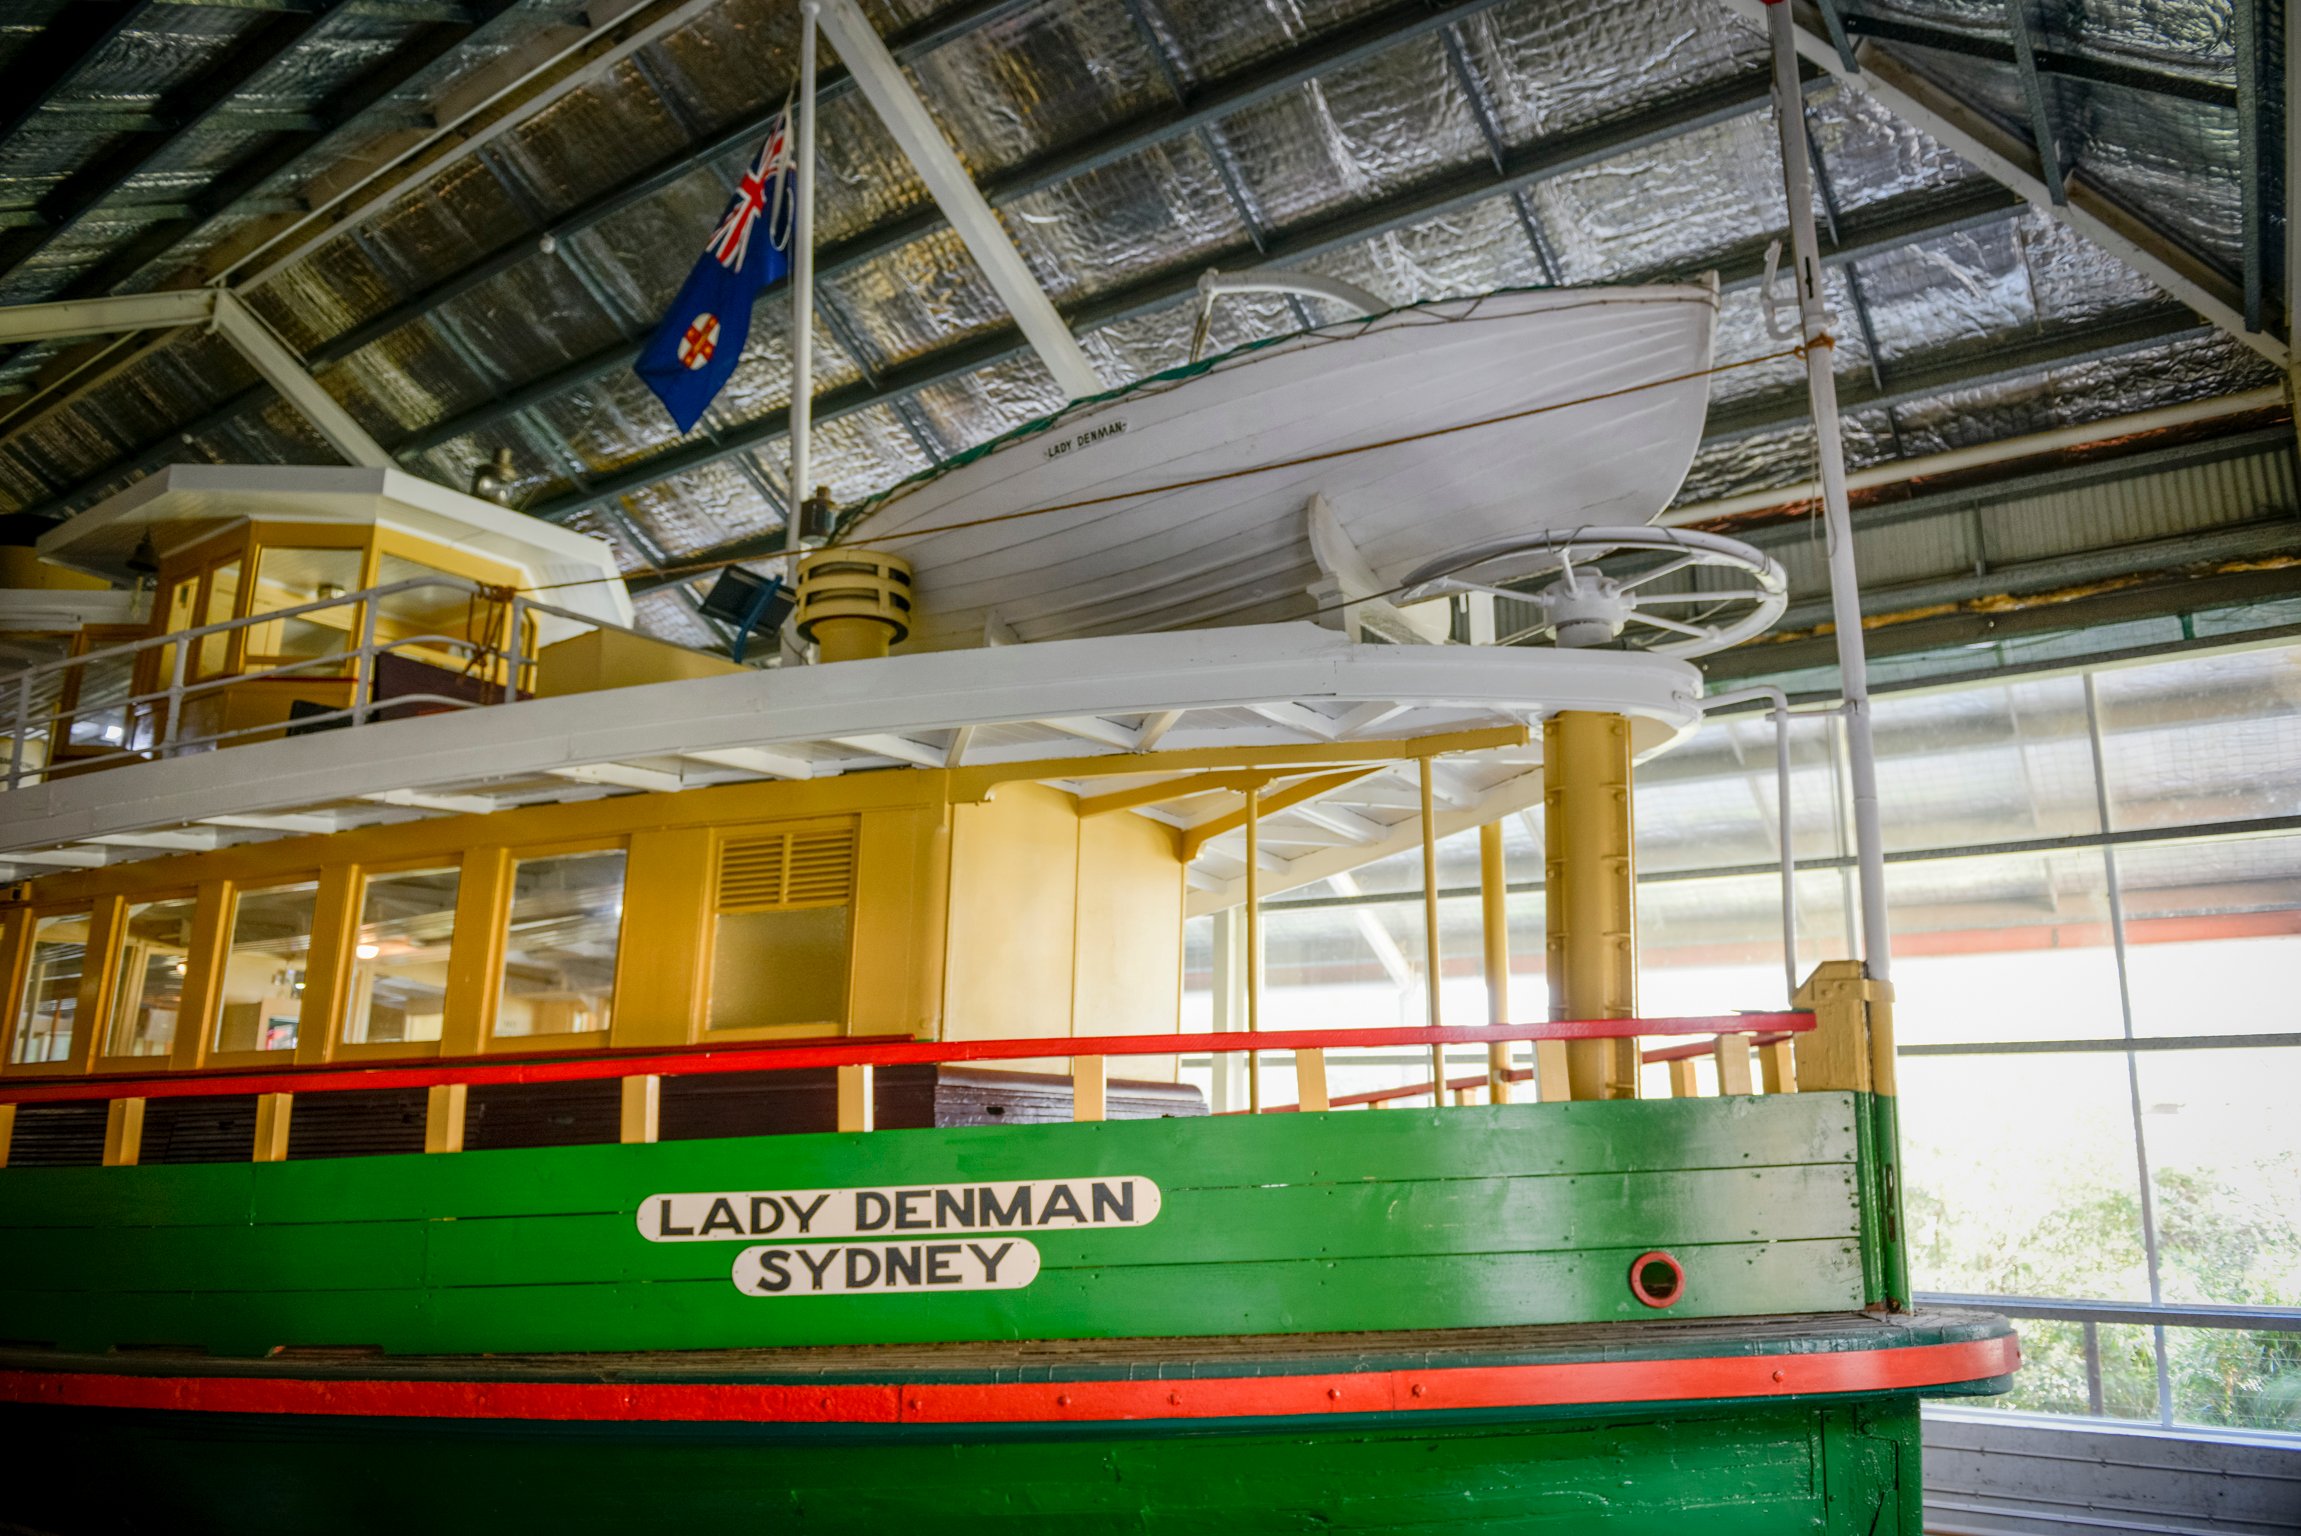 Lady Denman Sydney boat at Jervis Bay Maritime Museum